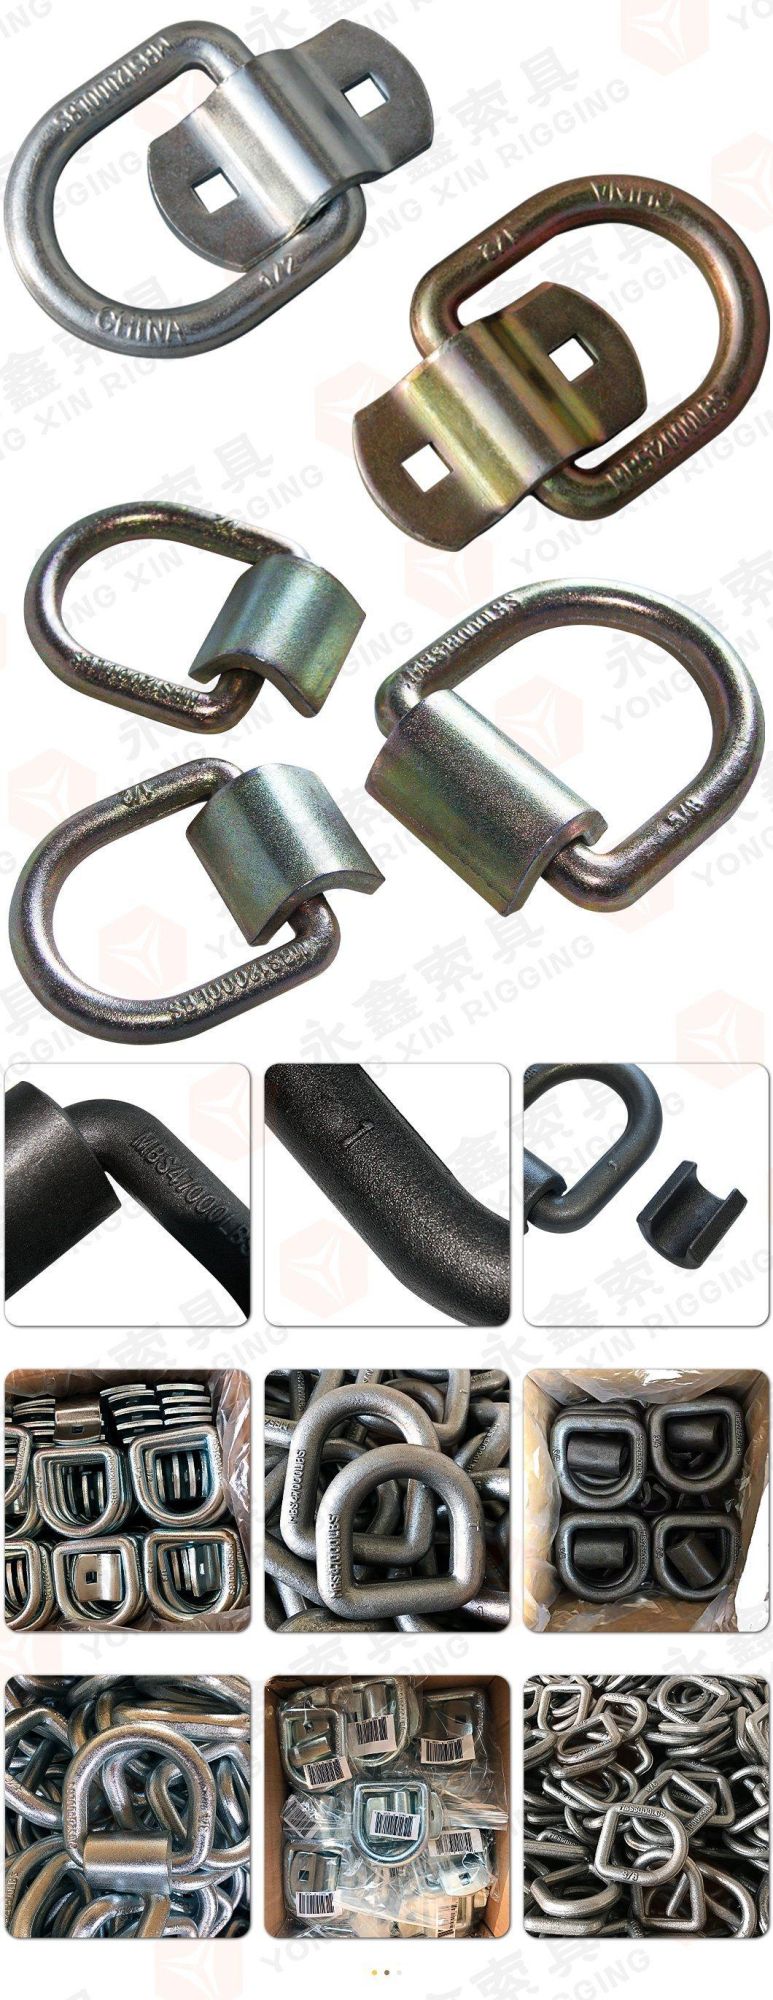 Lashing Ring High Quality 5/8" 18000lbs Forged D-Ring Assemblies and Weld-on Clips